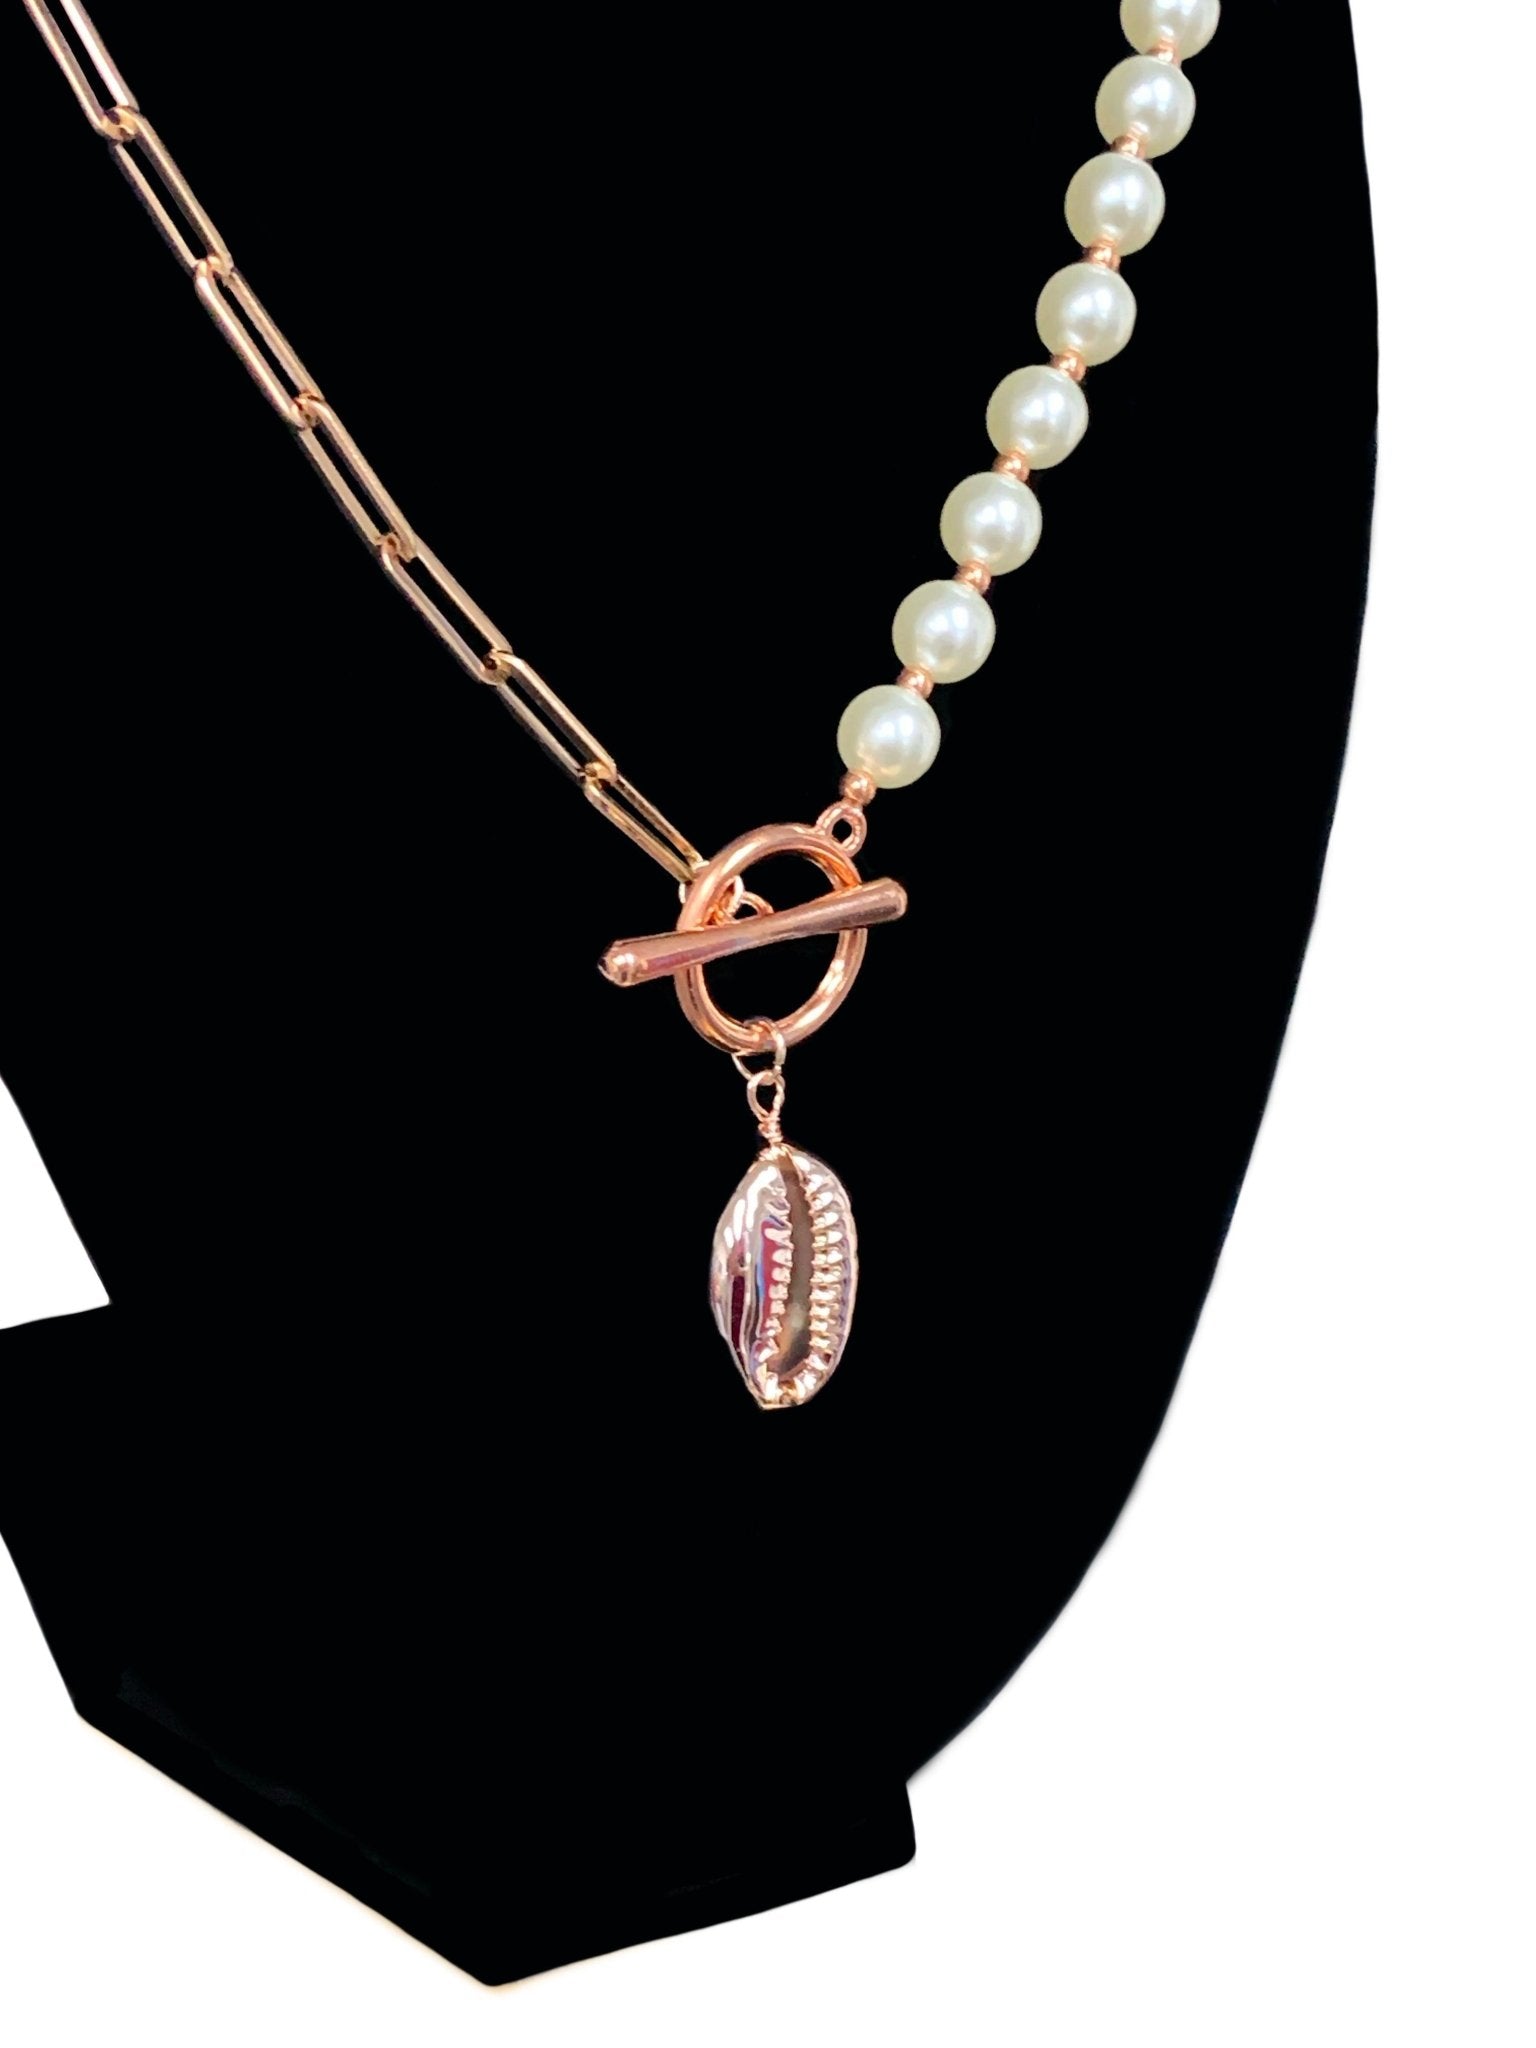 Mishu- Handmade Cultured Pearl and Rose Gold Paperclip Necklace/ Choker - Born Mystics